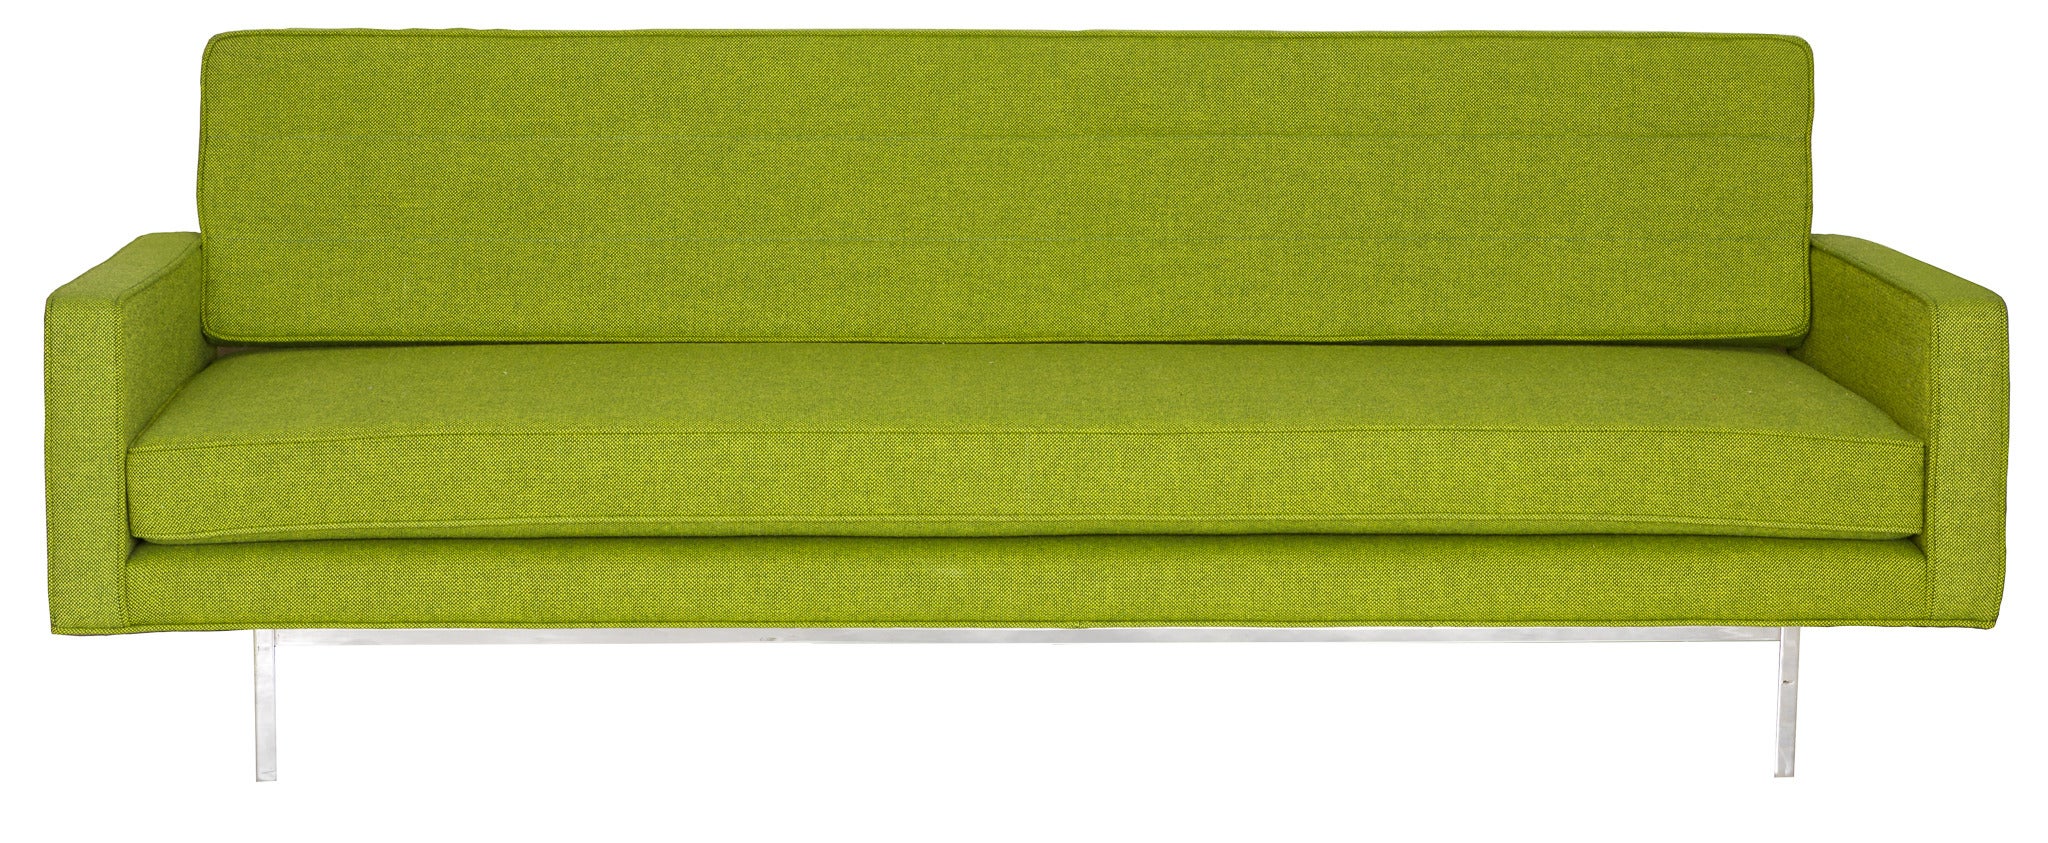 Florence Knoll Daybed Sofa